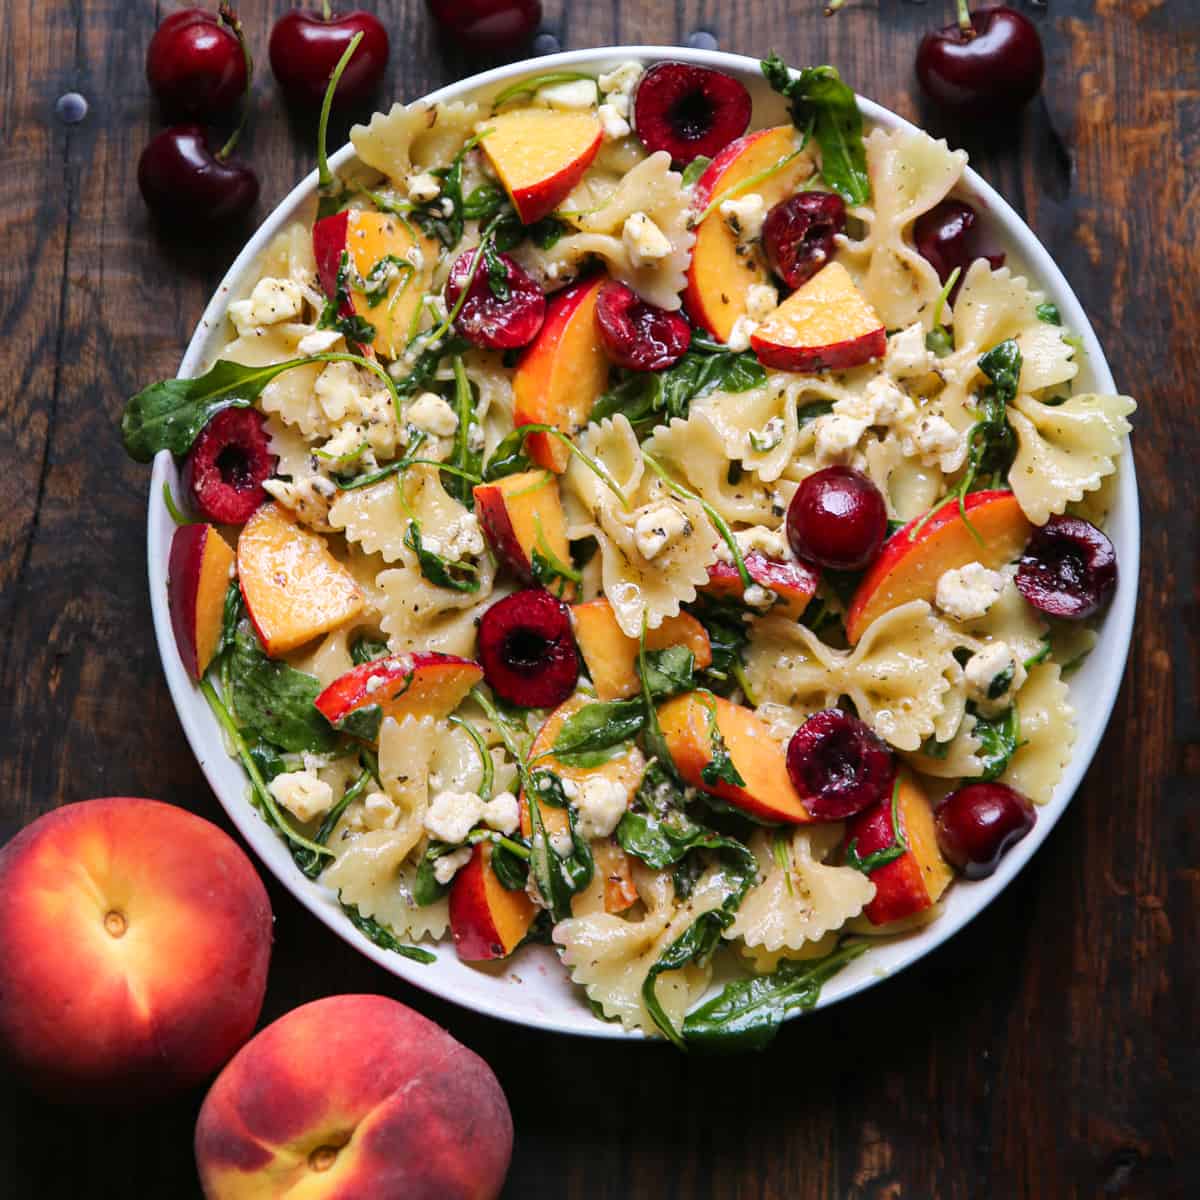 Stone Fruit Salad with Cherries, Peaches, Bow-Tie Pasta, Feta, and Arugula - in a white bowl.